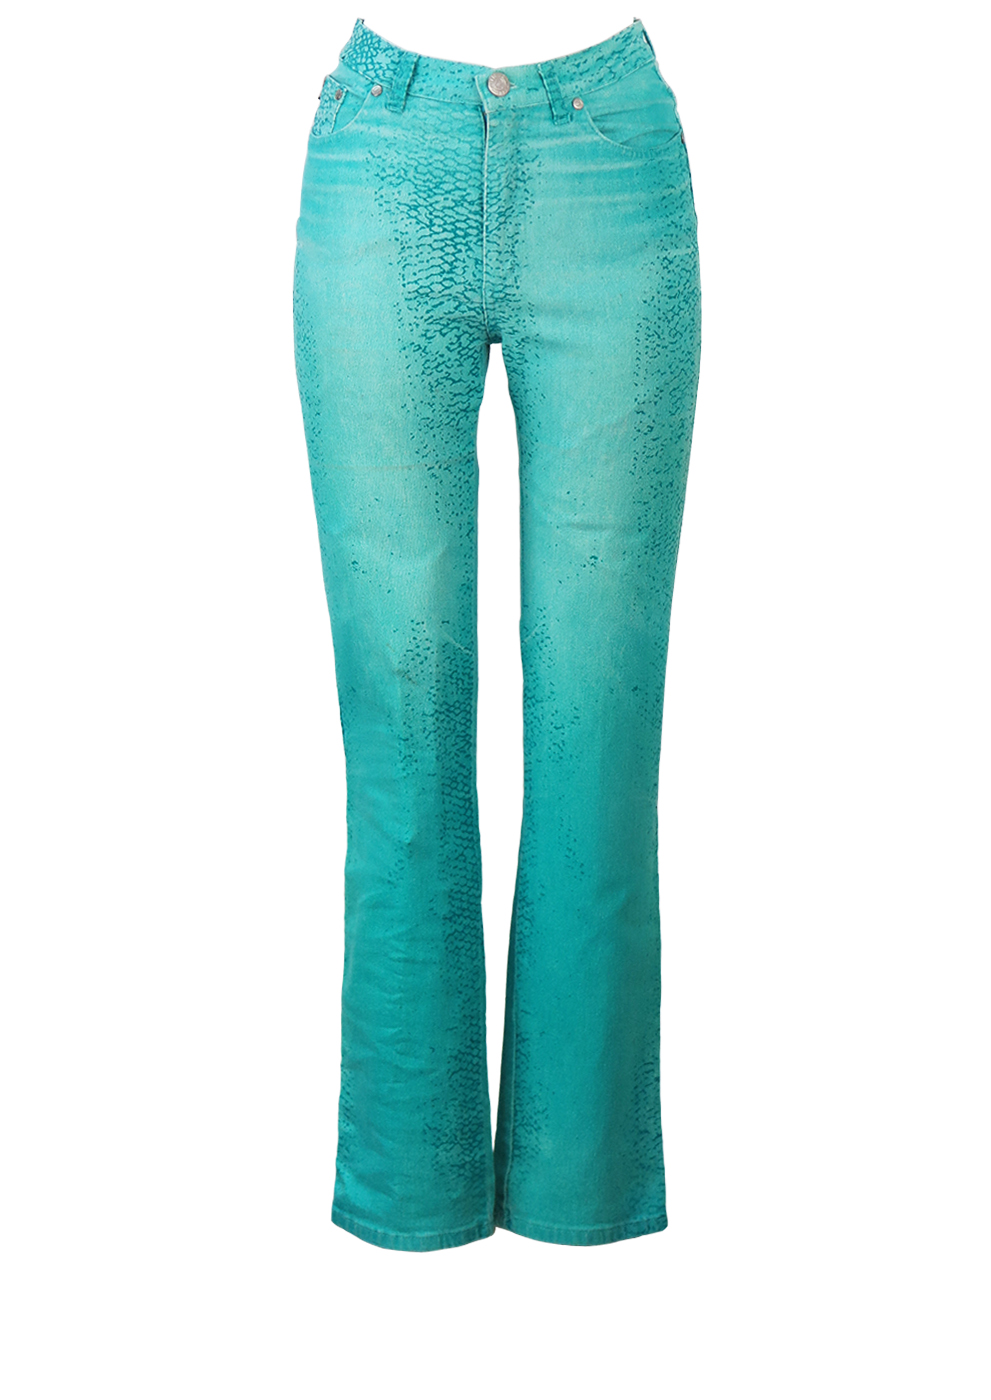 Cavalli Jeans Fitted Stretch Jeans with Turquoise Snakeskin Style Print ...